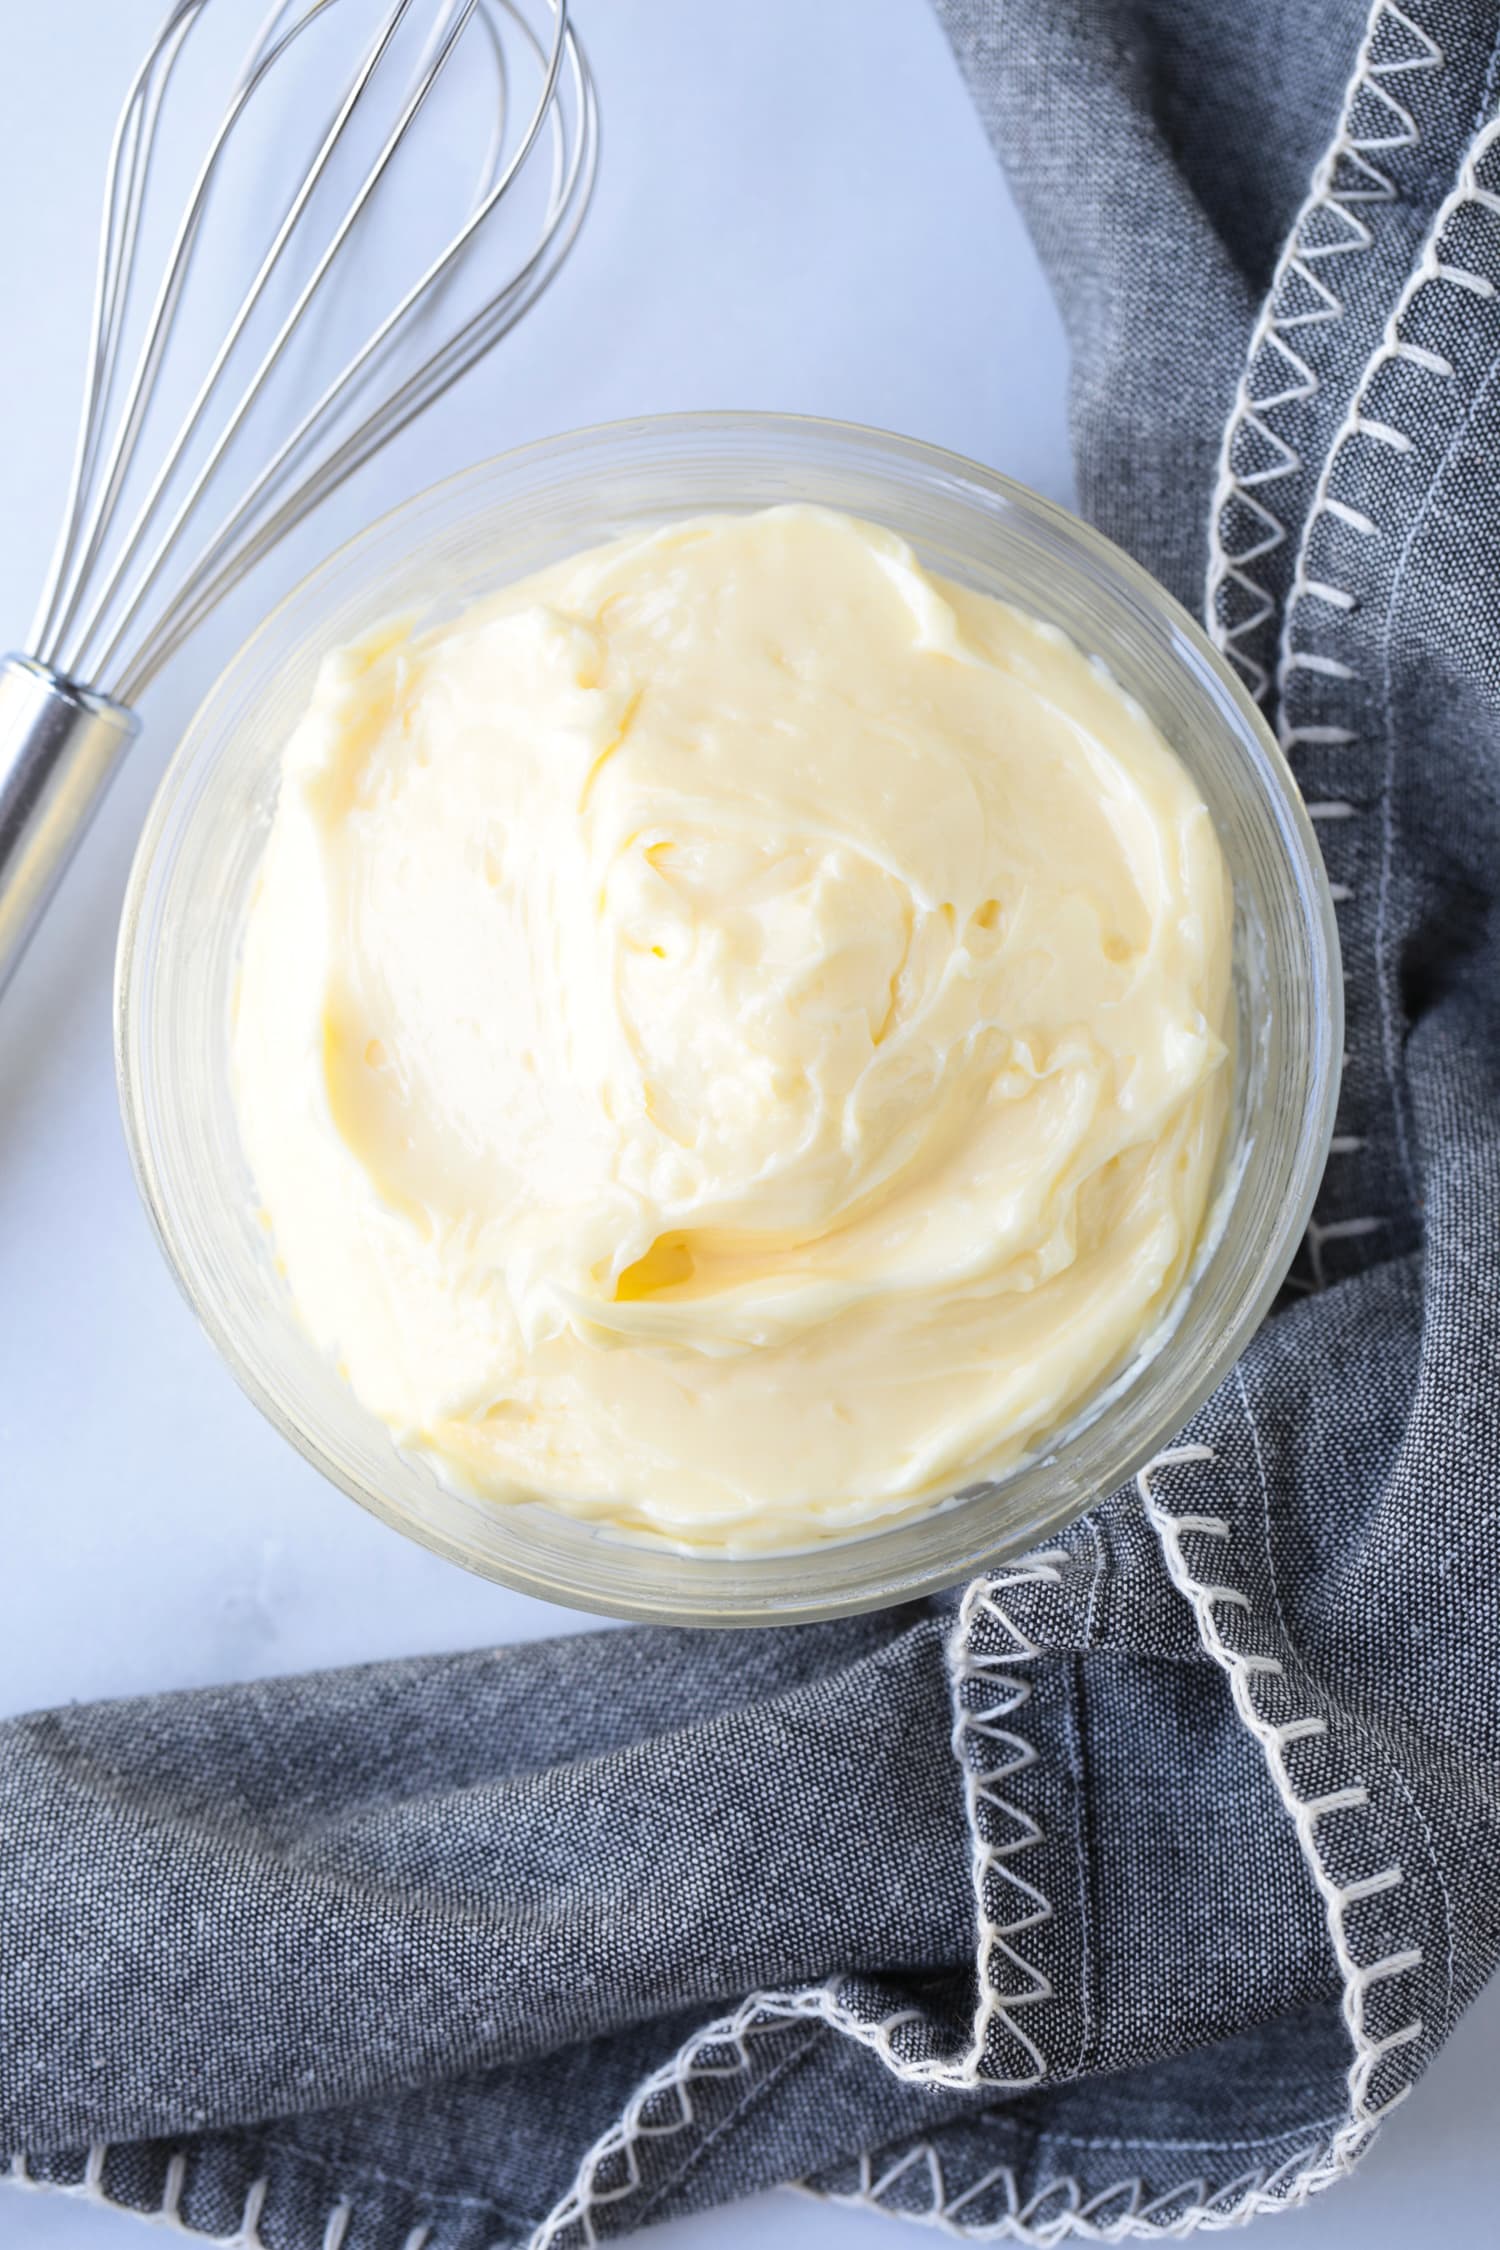 homemade mayonnaise is a dish with napkin and whisk